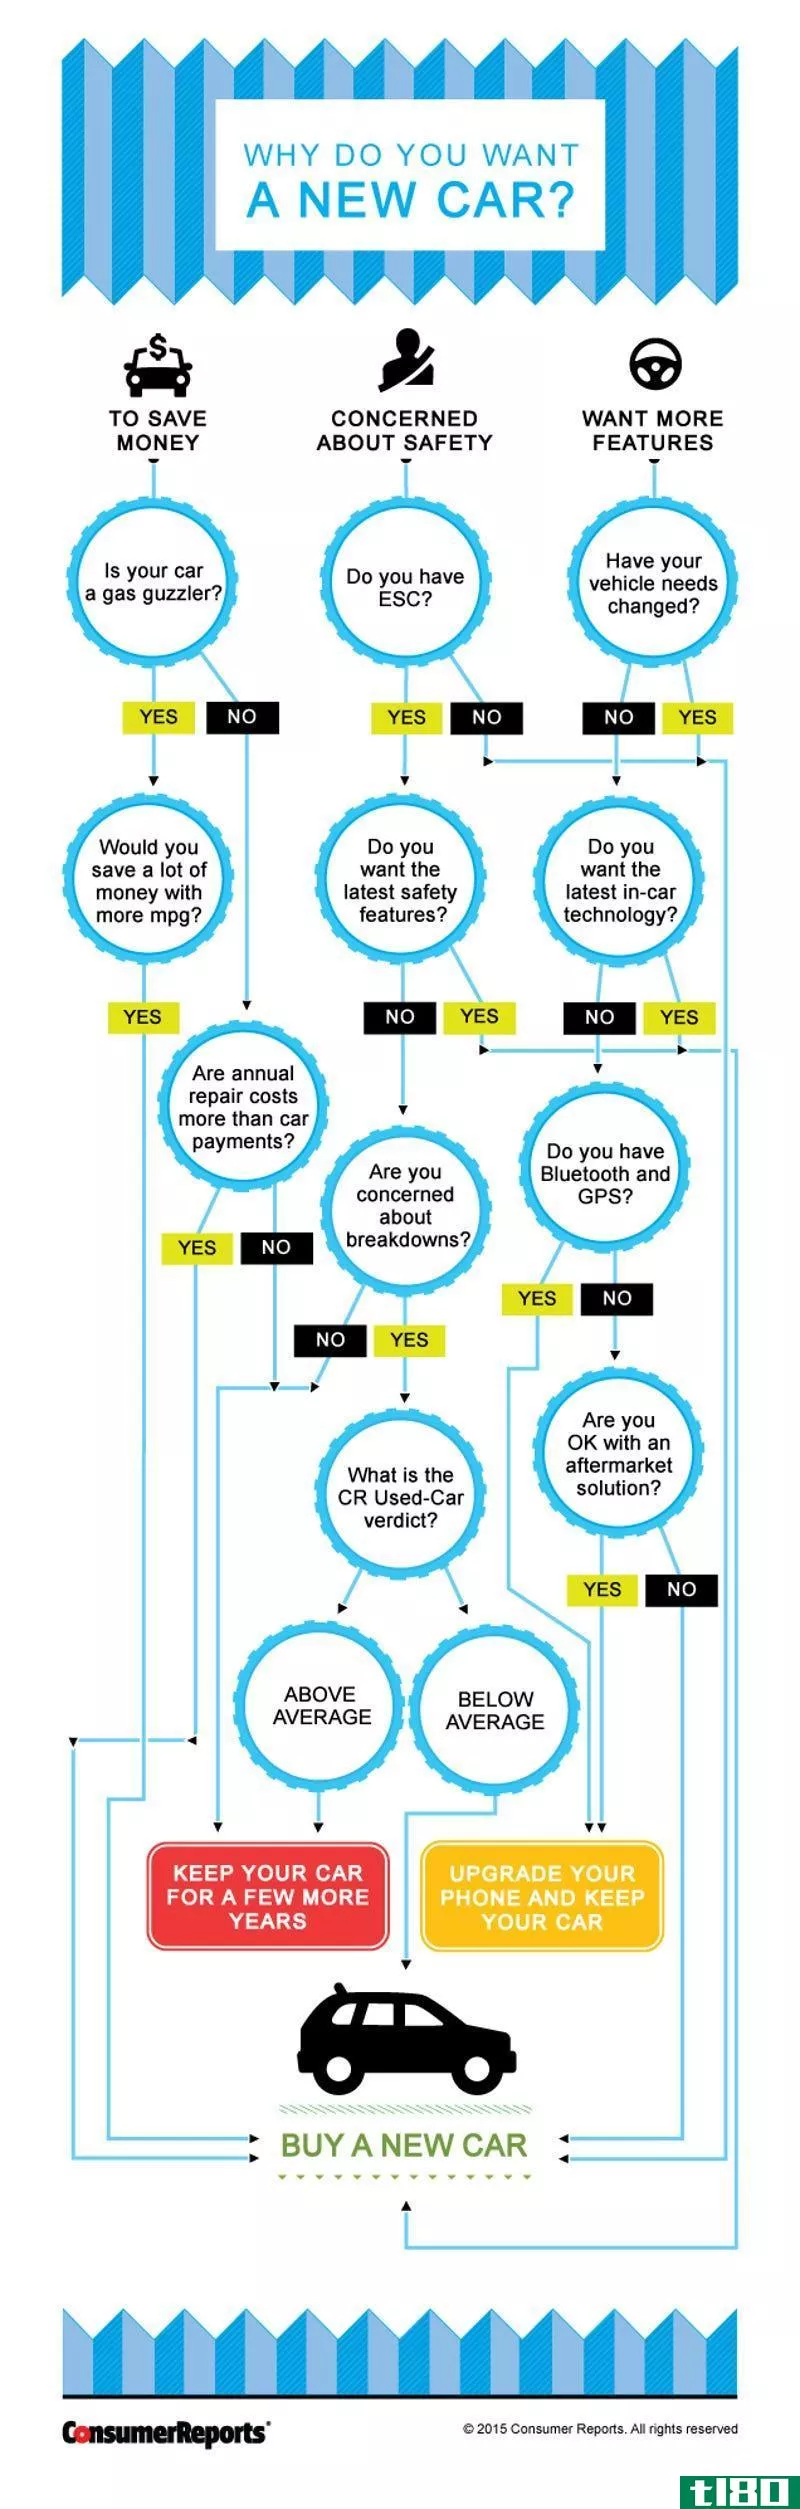 Illustration for article titled Know When to Buy a New Car with This Flowchart